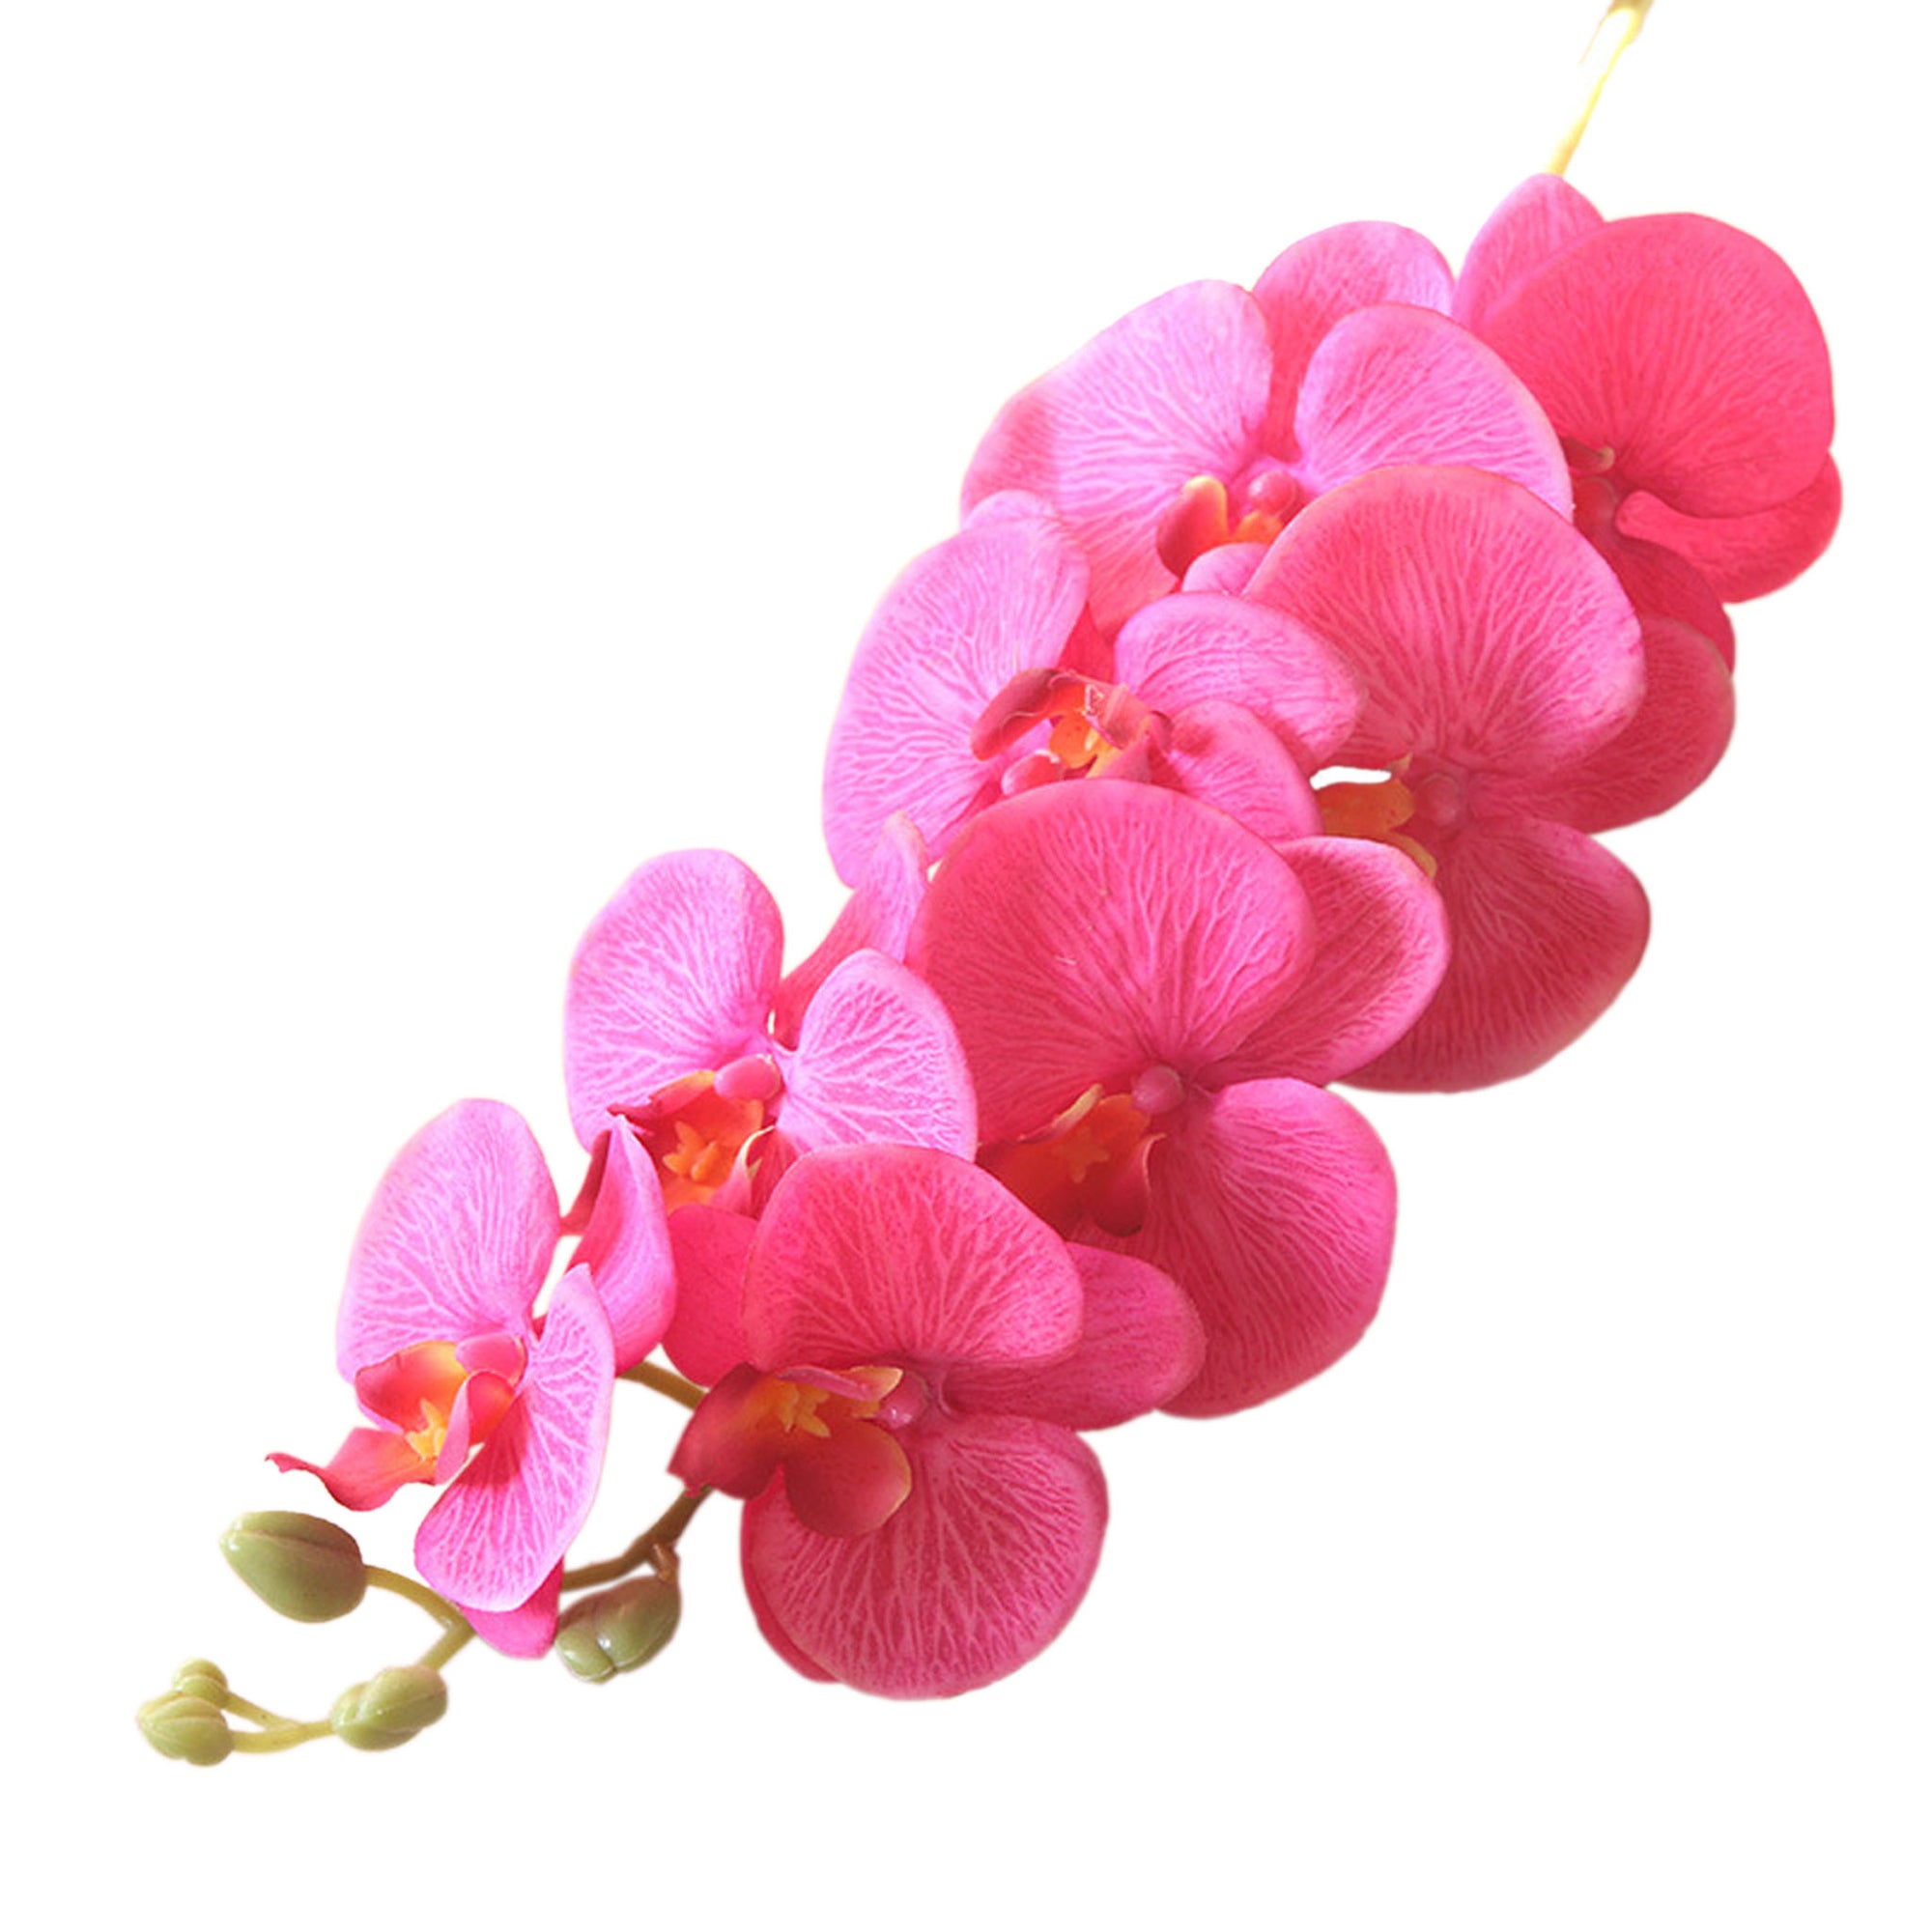 Artificial Orchid Flowers Realistic Phalaenopsis